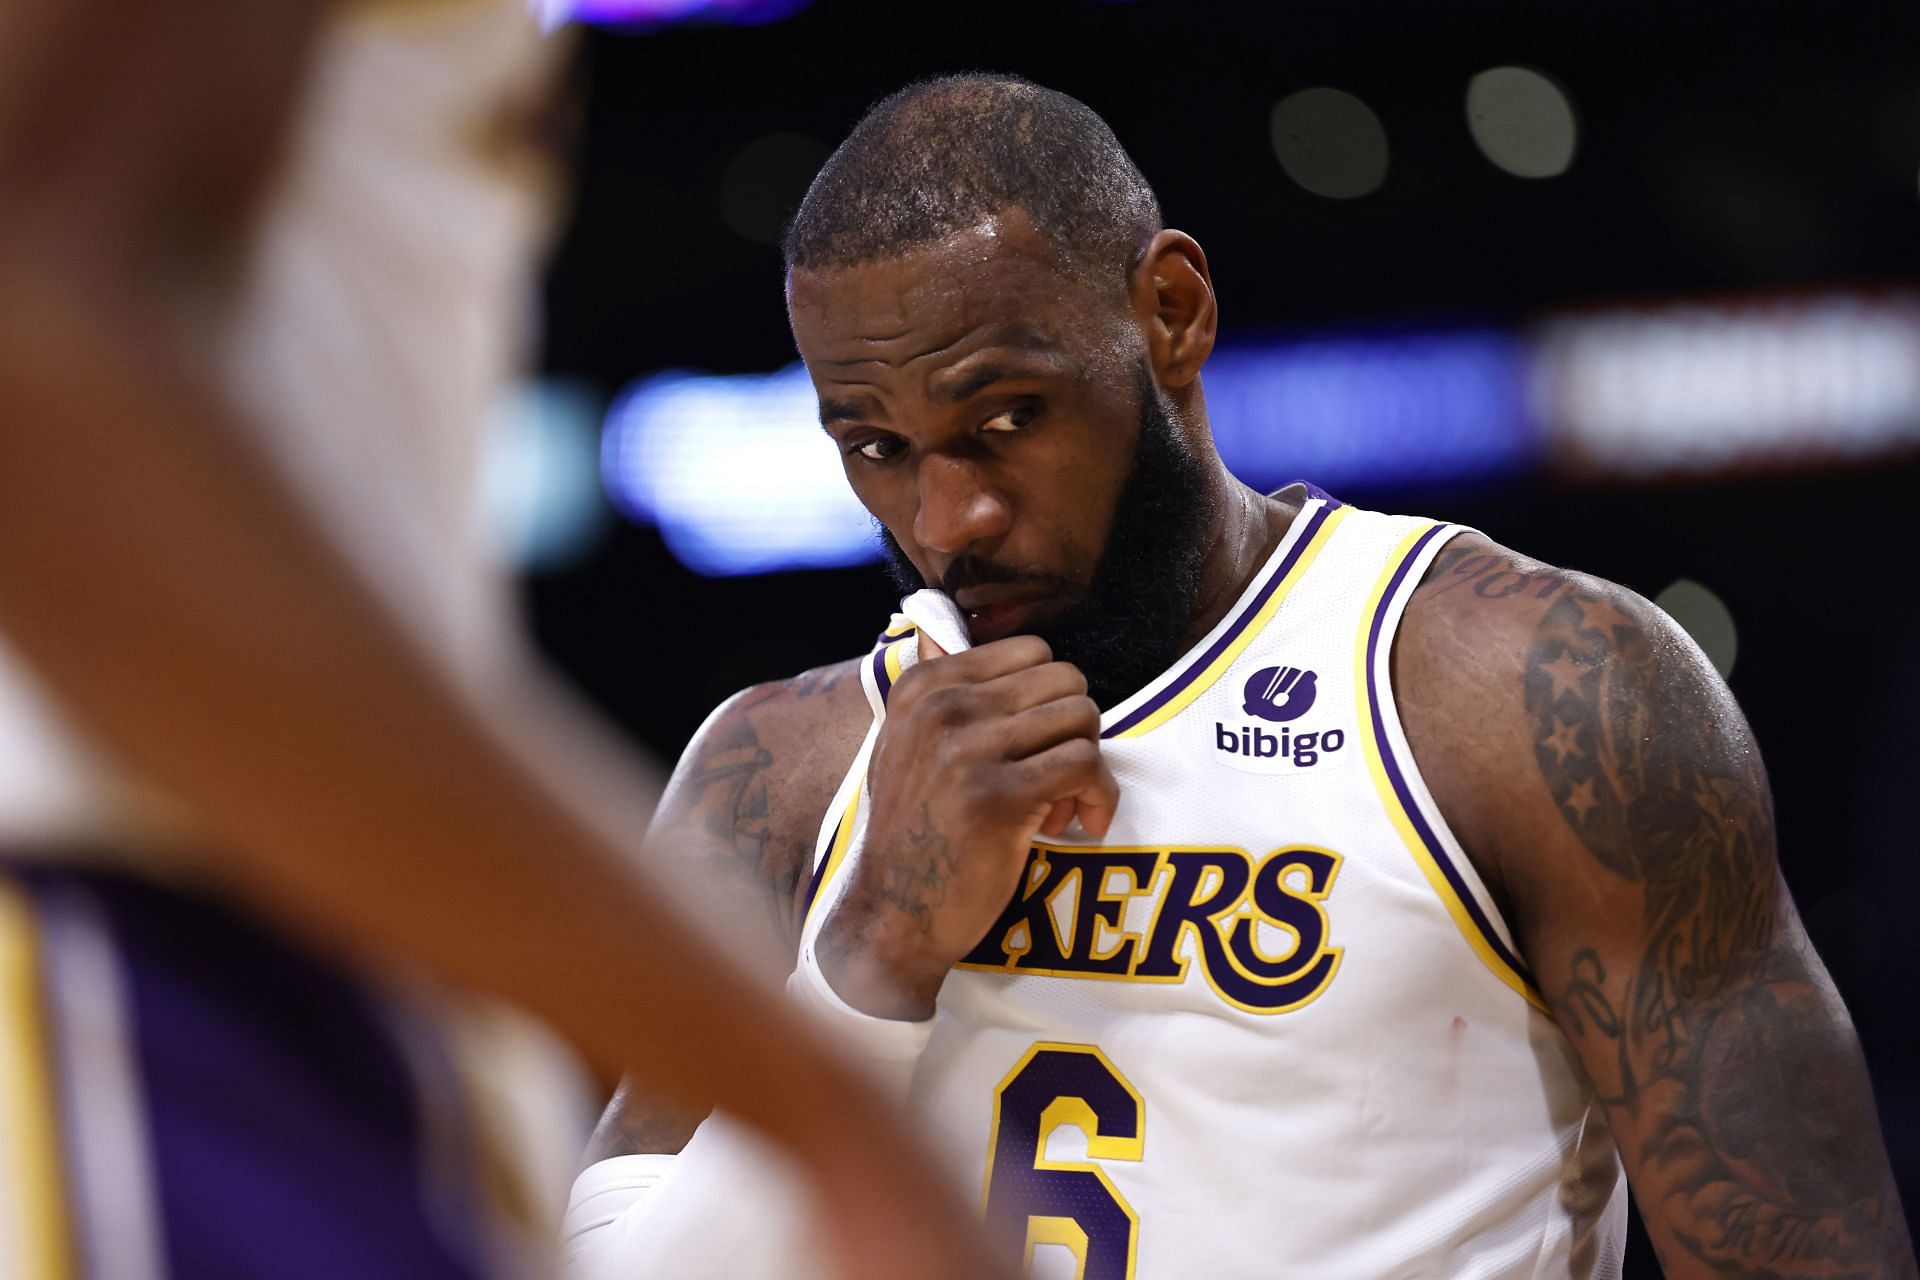 The LA Lakers could embarrassingly miss even the play-in tournament.